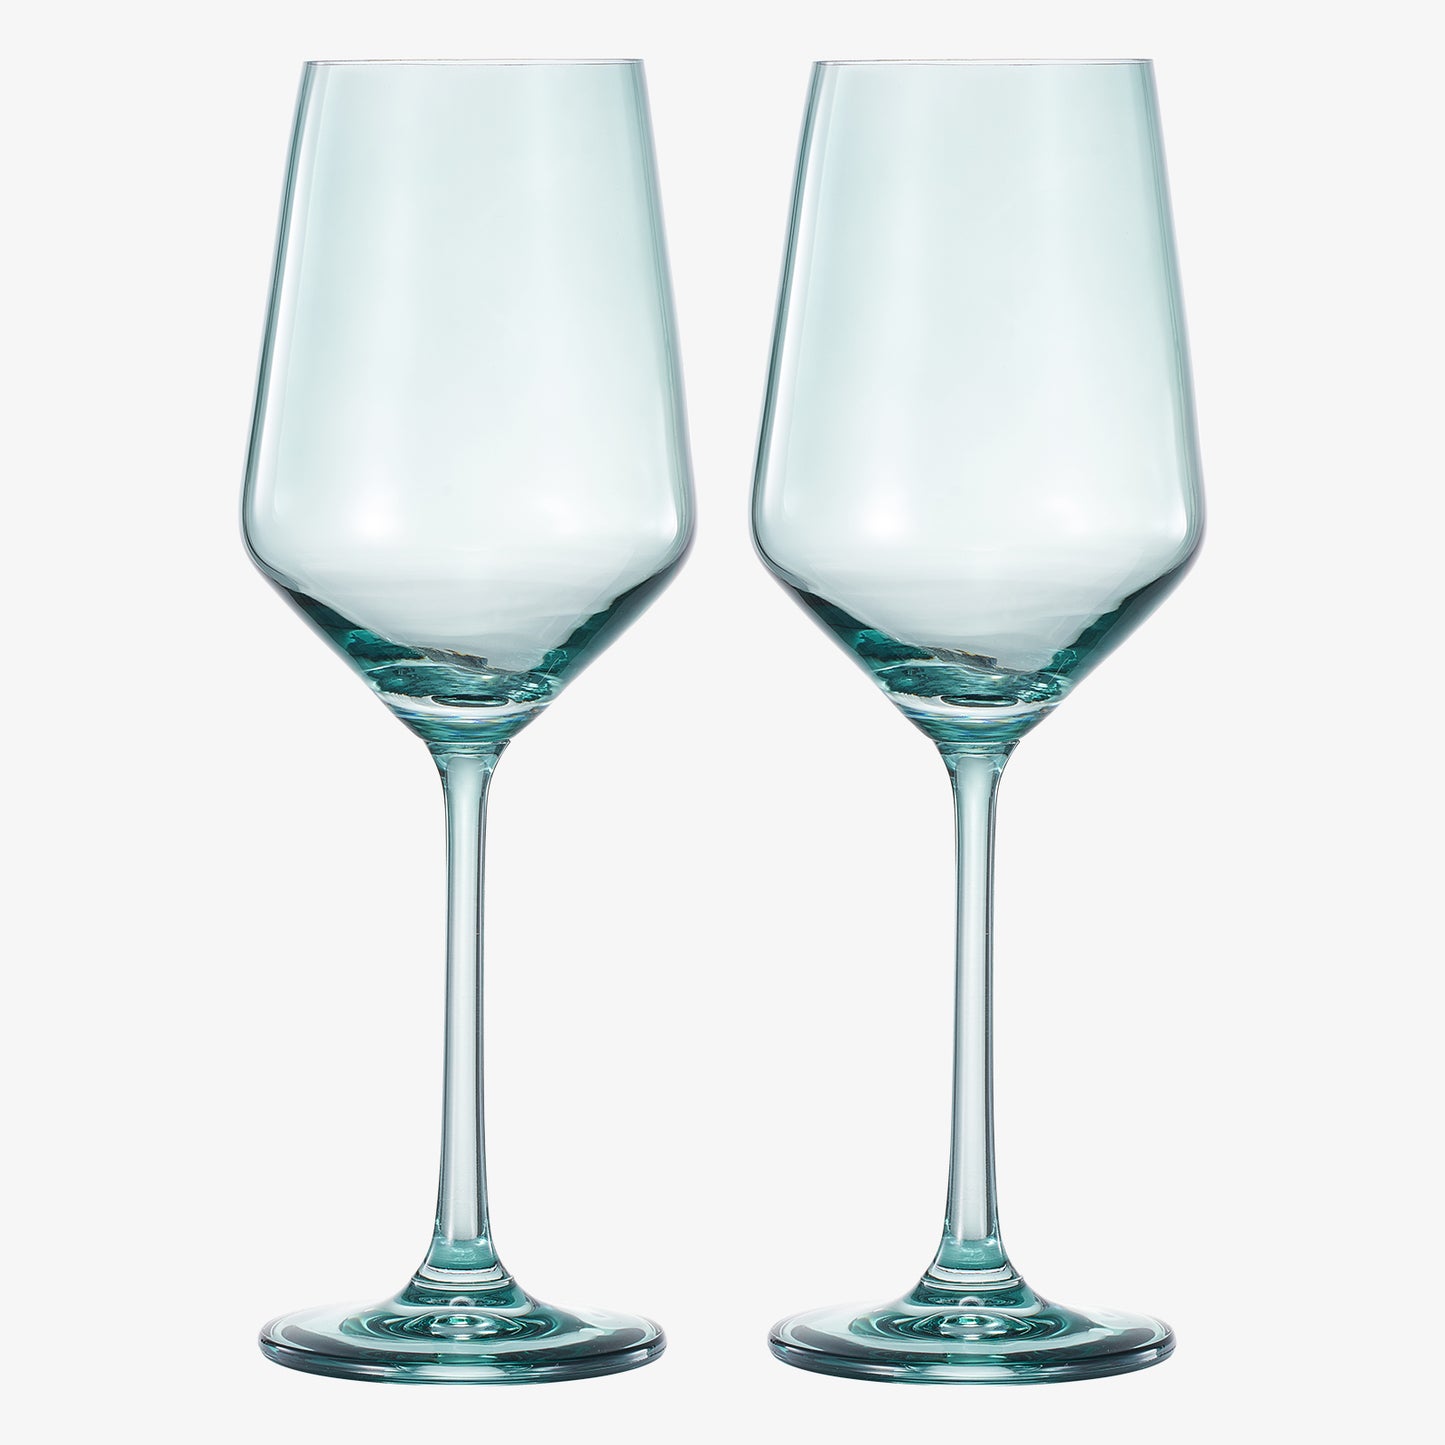 Tonal Colored Wine Glassware, Forest Green, Set of 2